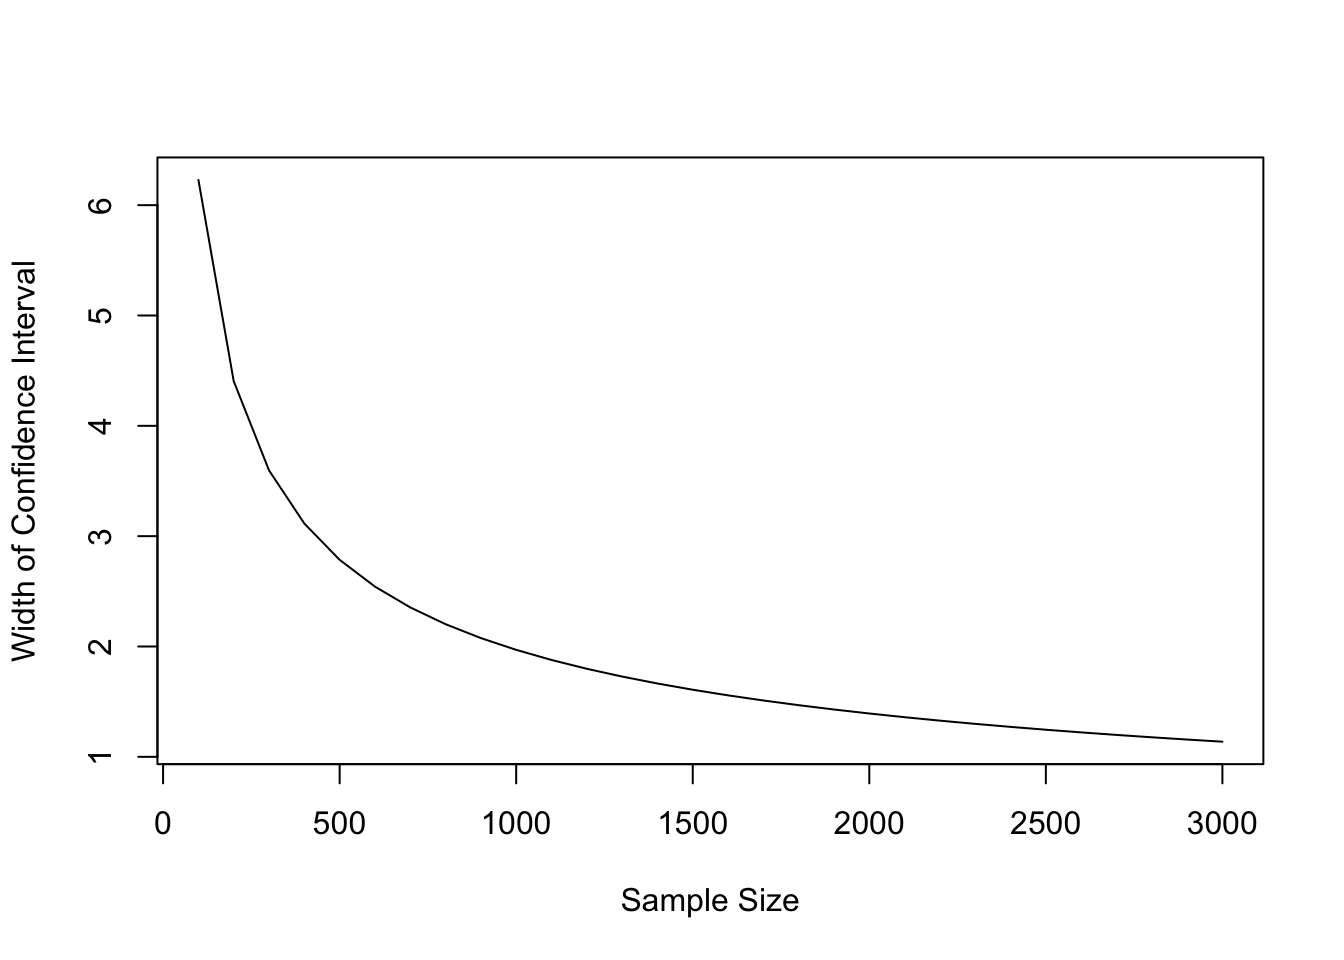 Width of a 95 Percent Confidence Interval at Different Sample Sizes (Std Dev.=15.89)